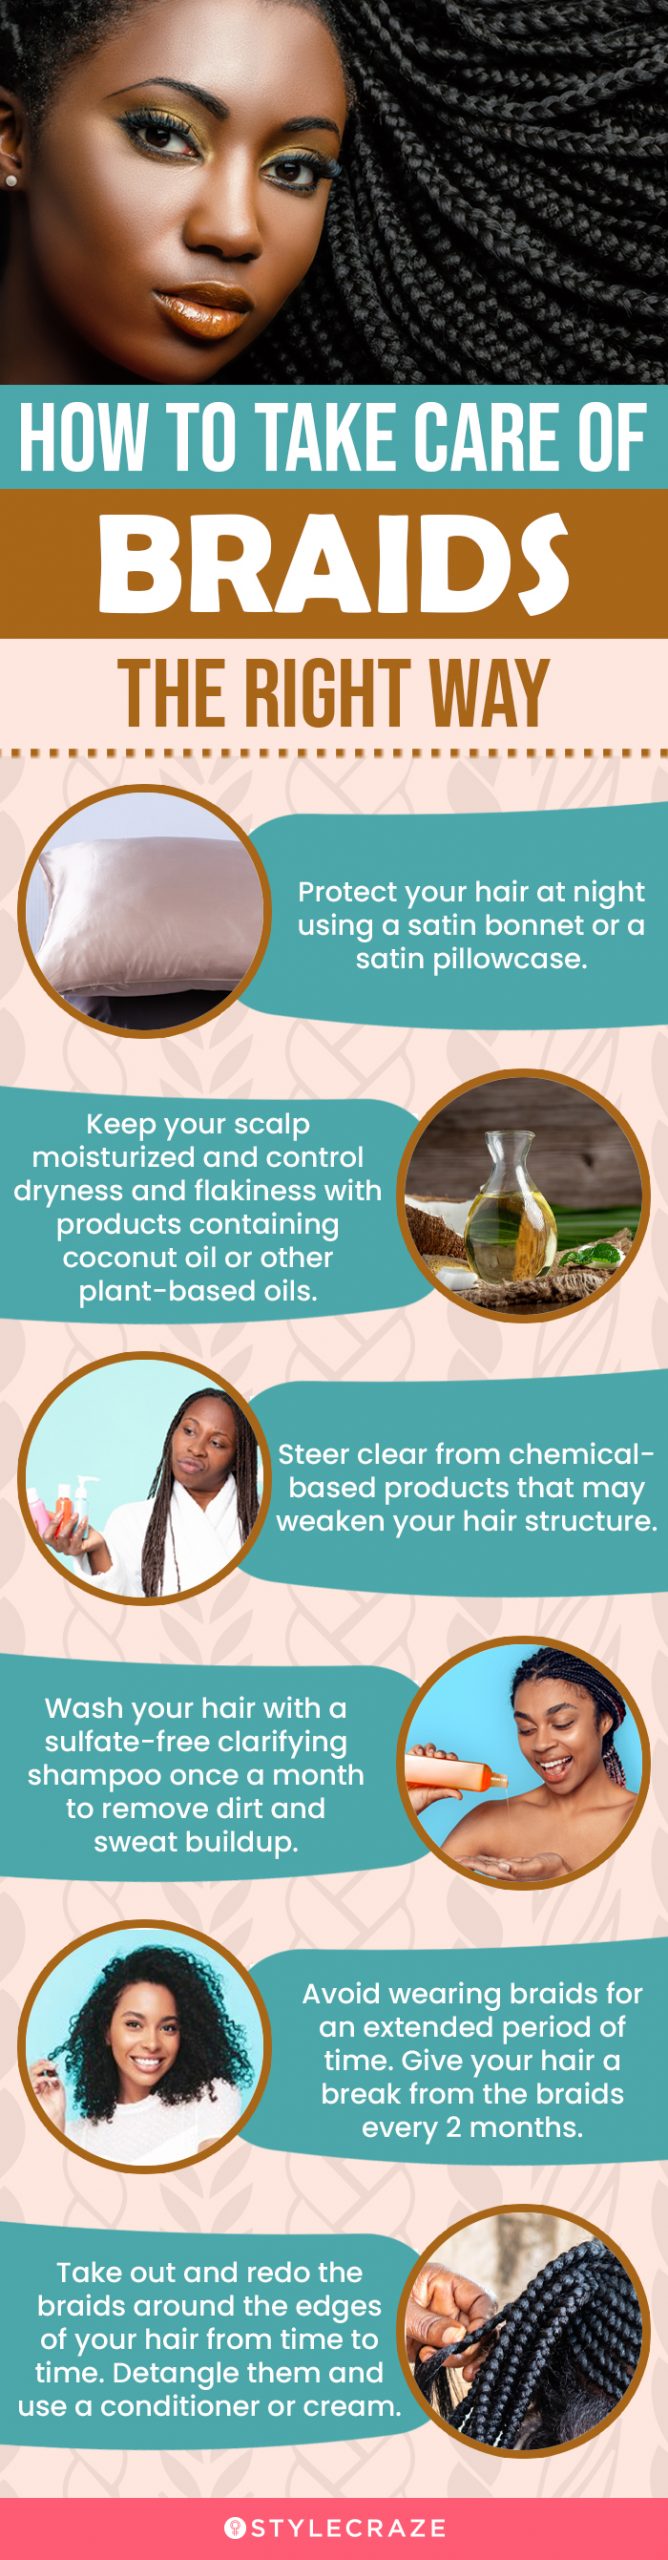 Tips To Take Care Of Braids The Right Way (infographic)